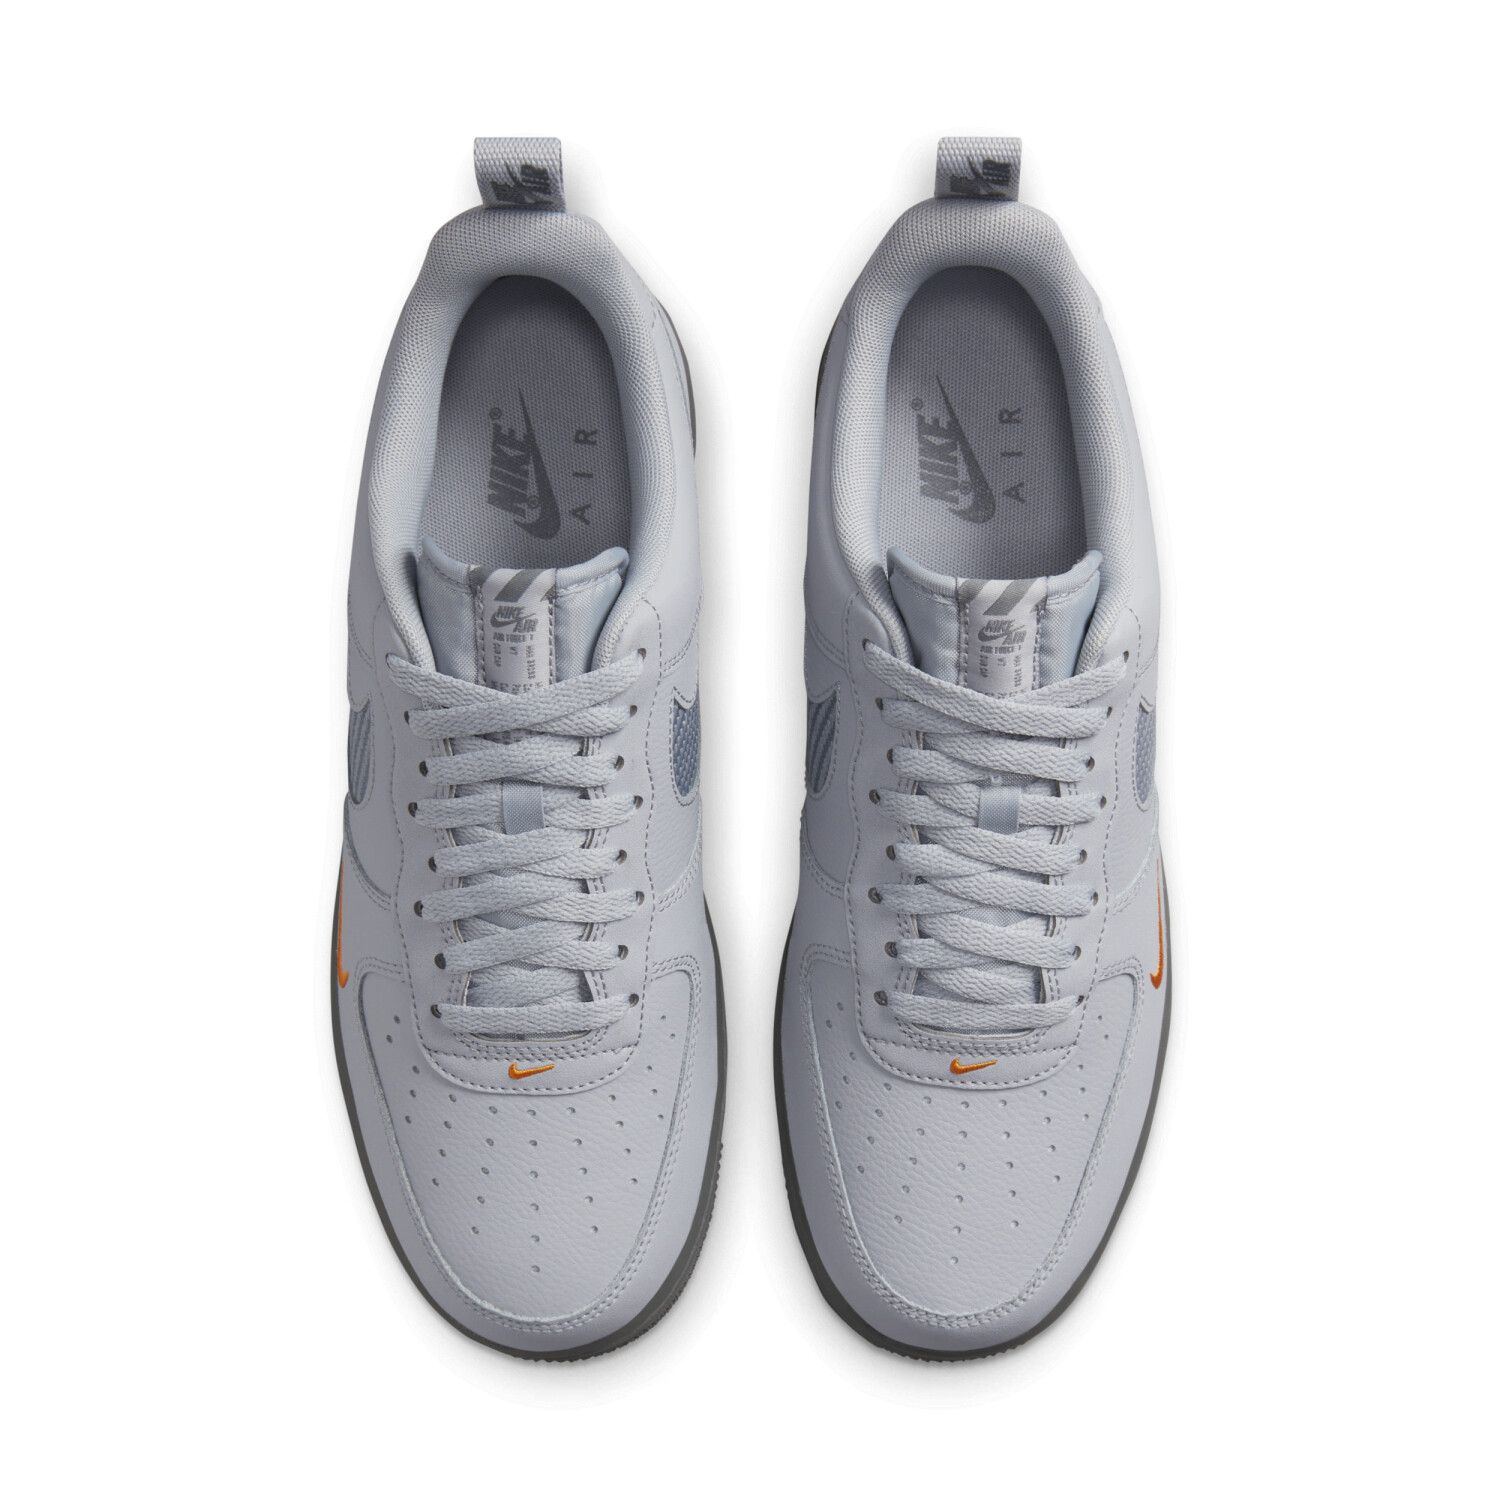 What are y'all's thoughts on these? Air Force 1 '07 Low “Wolf Grey/Kumquat”  : r/Sneakers